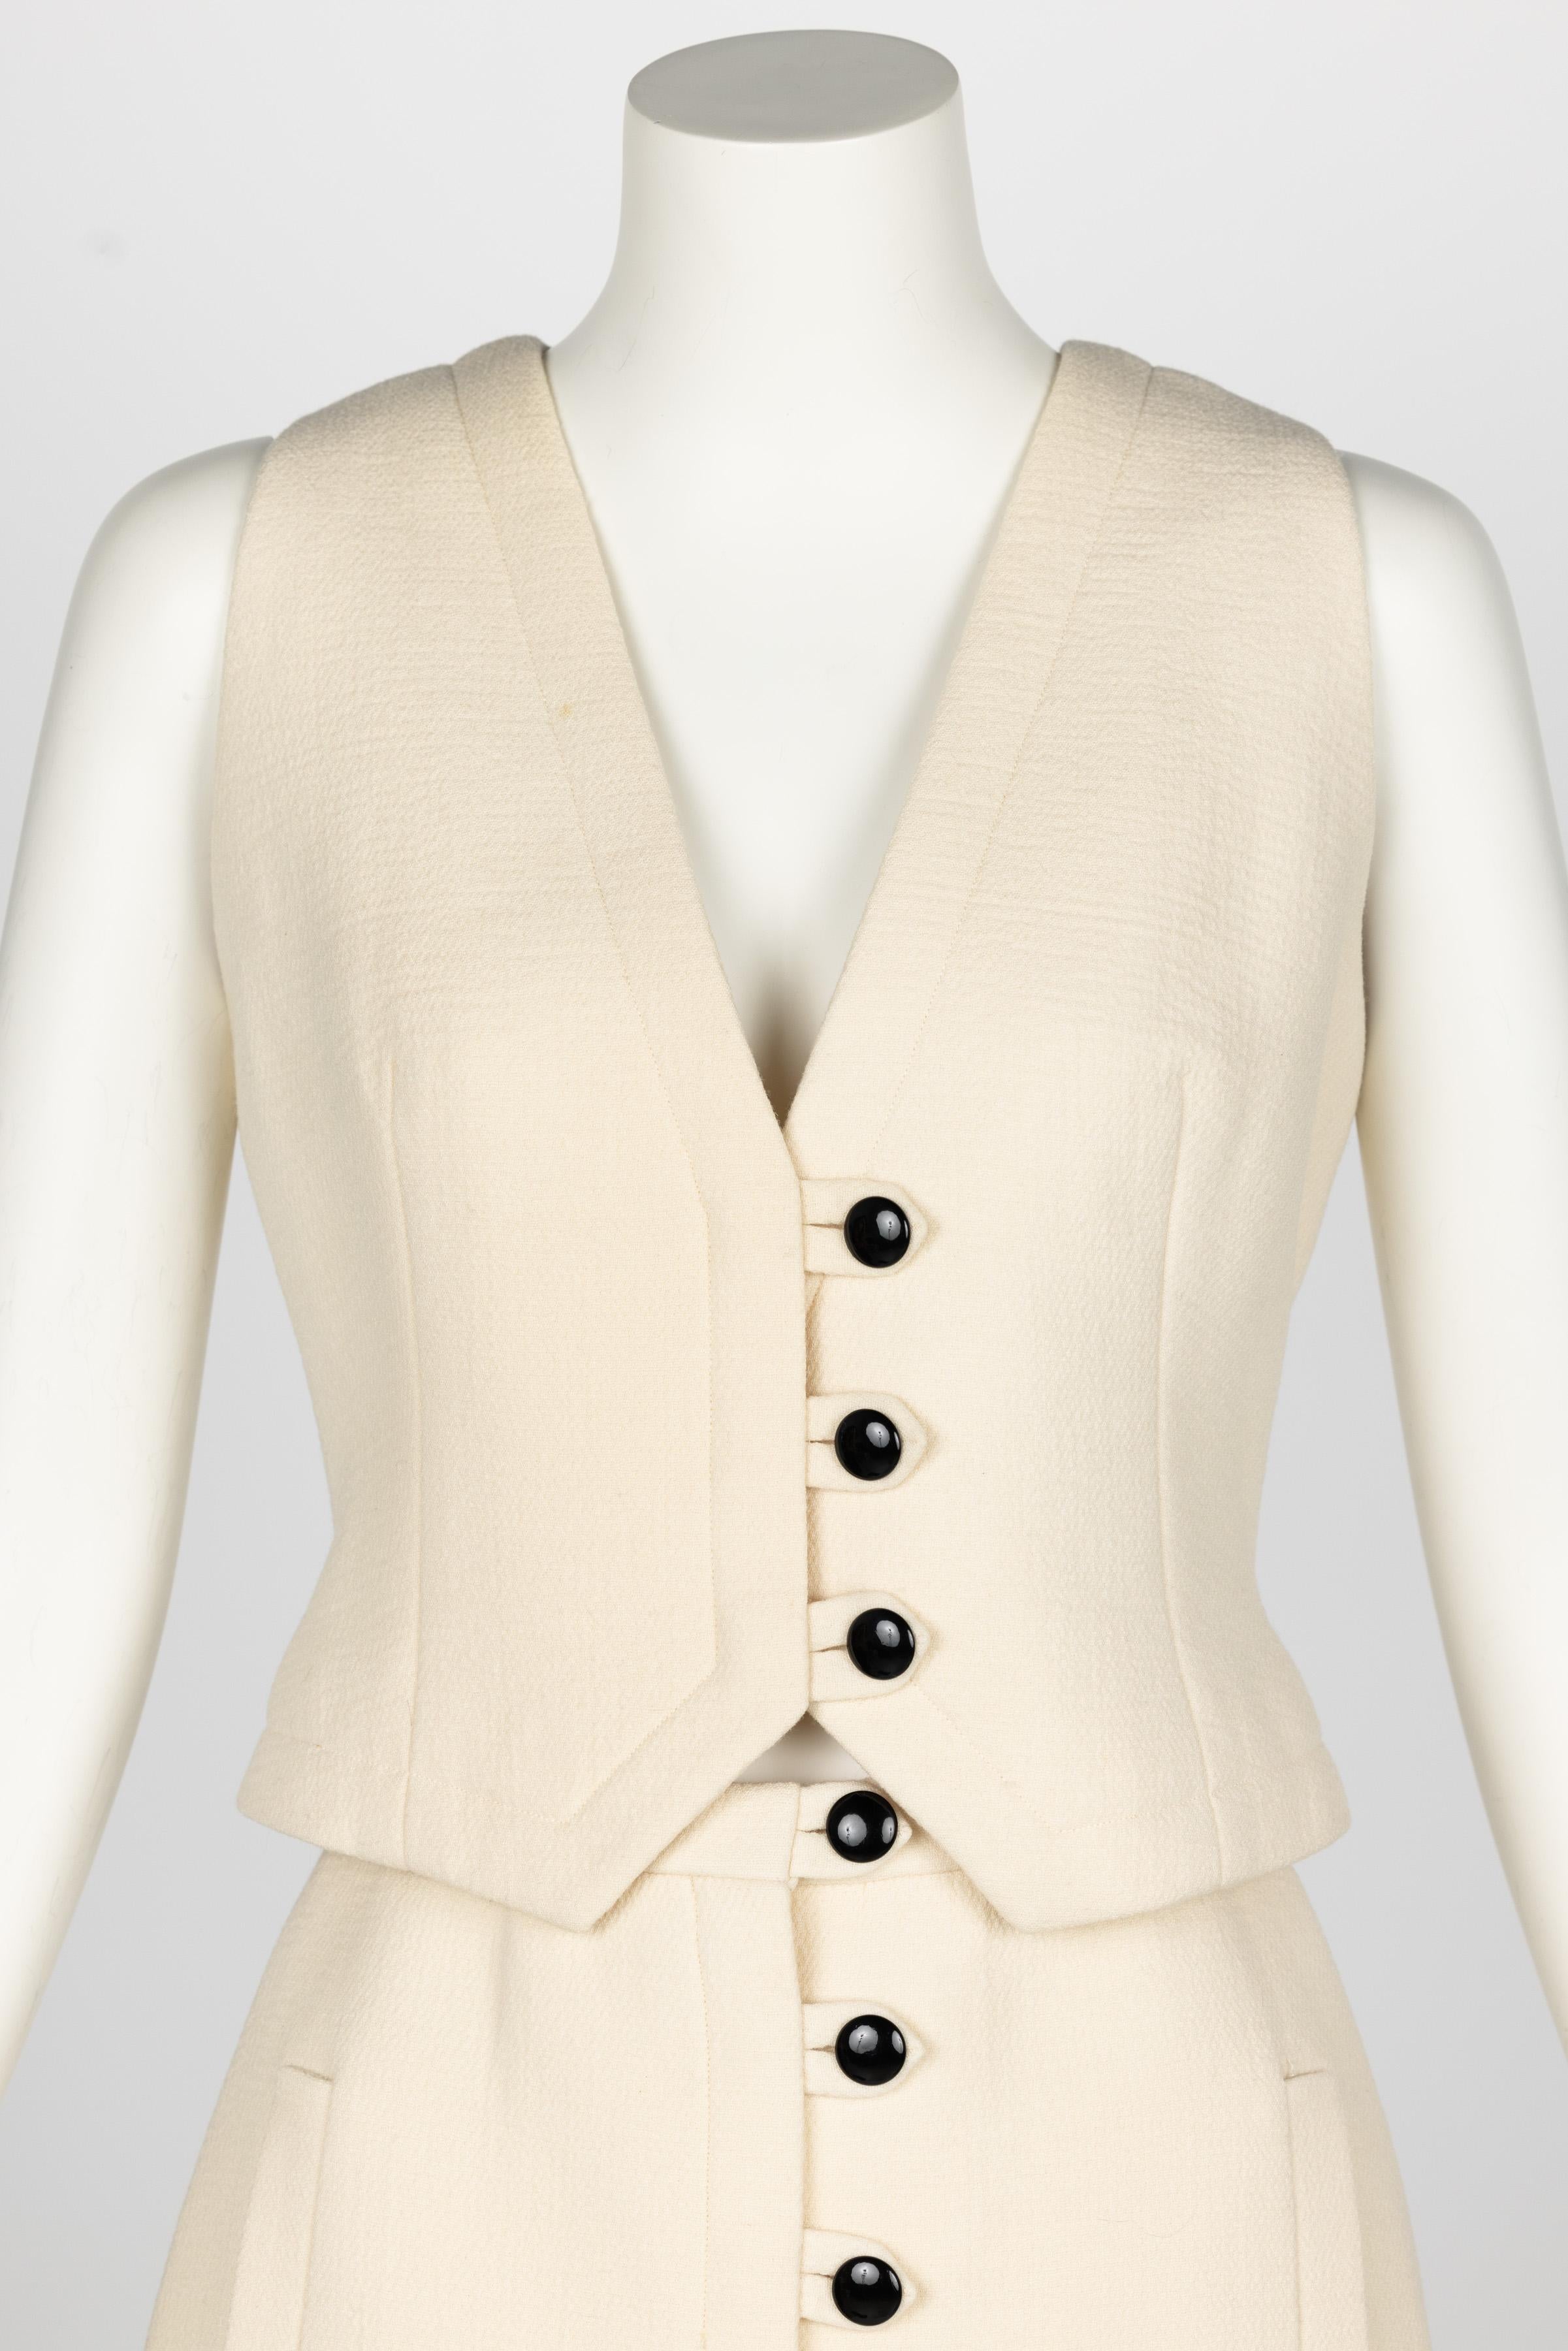 1960s Pauline Trigere Ivory & Black Tailored Vest Skirt Suit In Excellent Condition For Sale In Boca Raton, FL